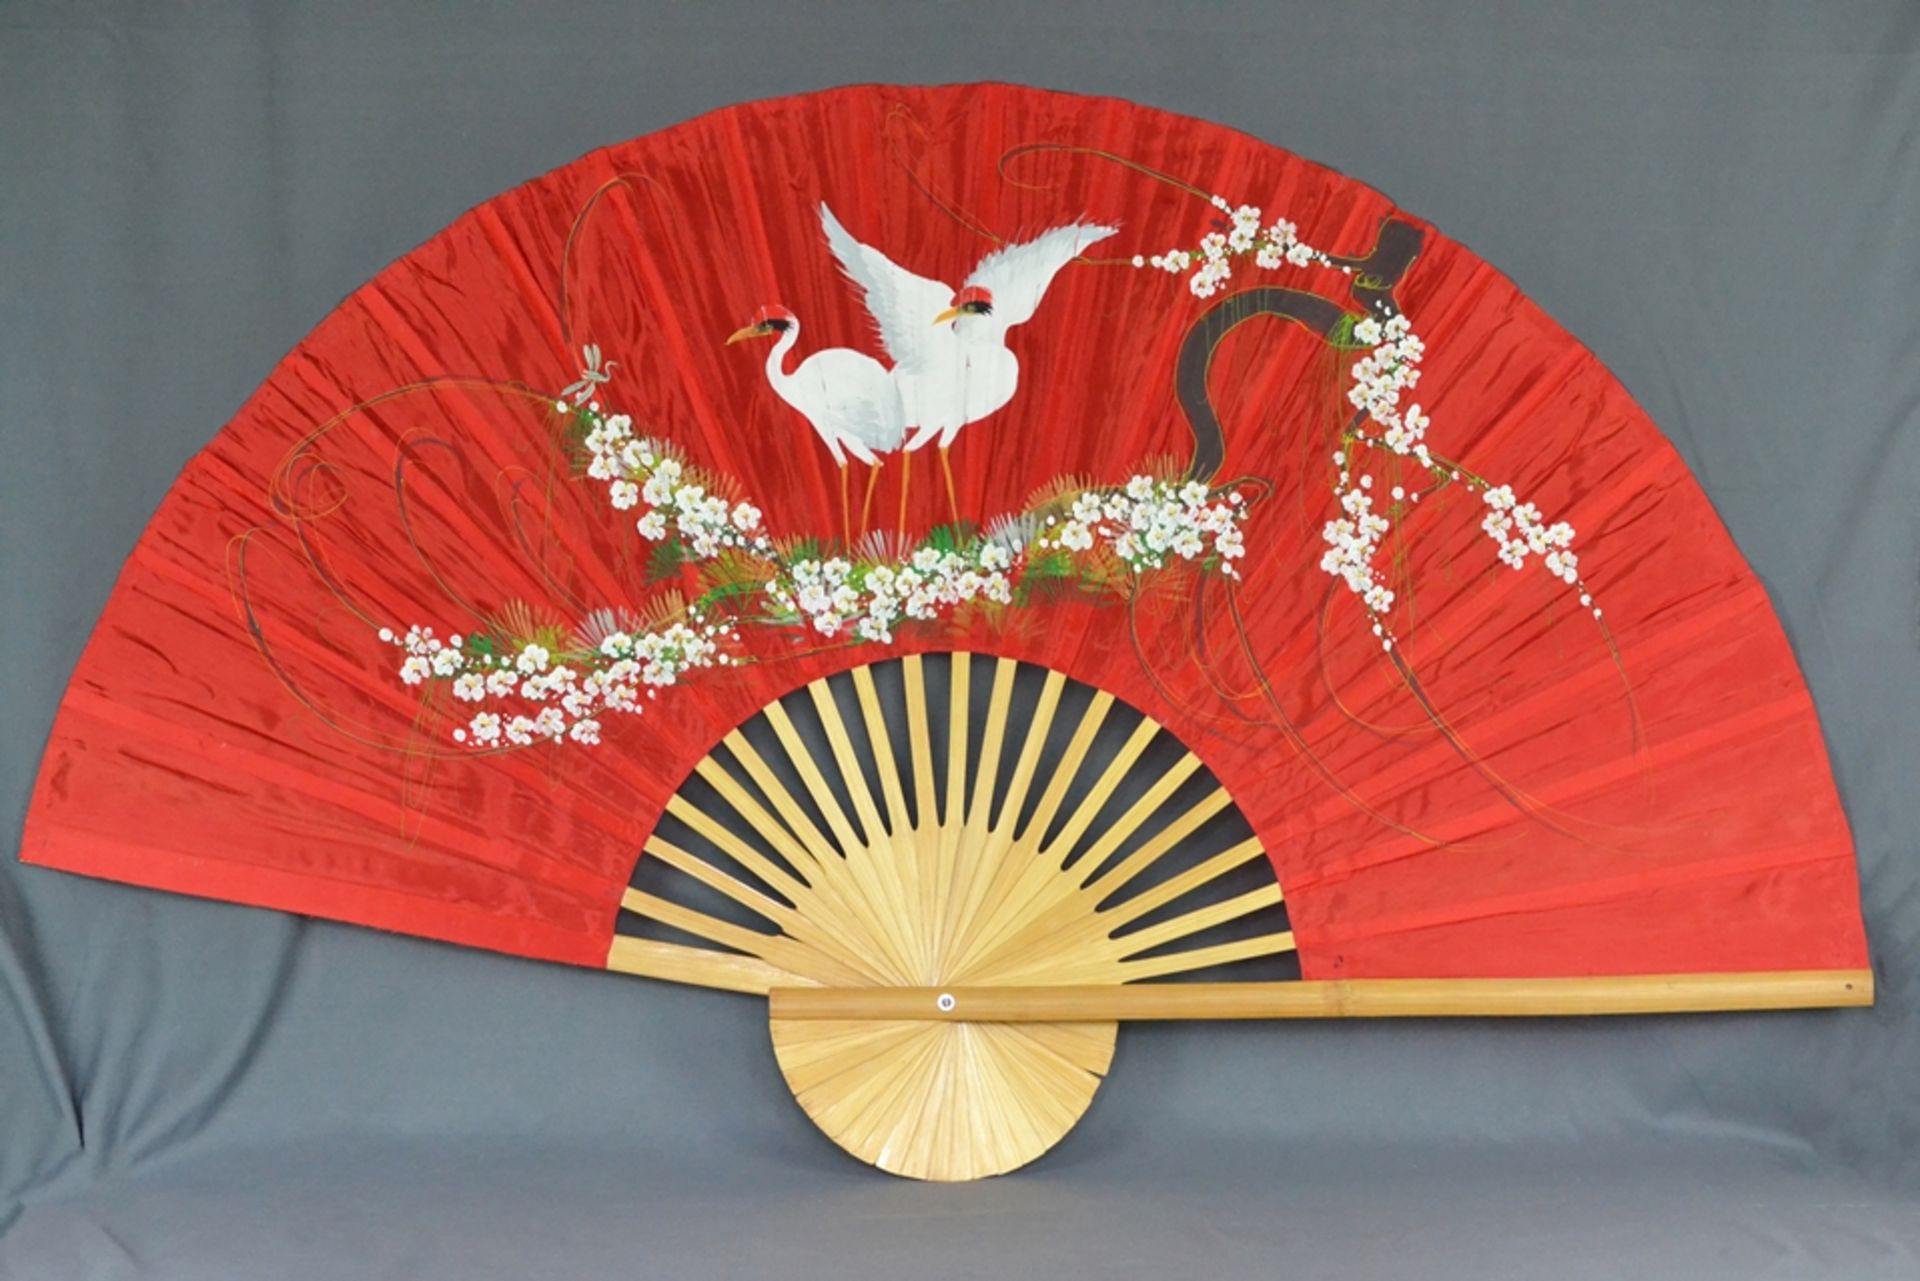 Large fan, red fabric painted with cranes and flowers, bamboo struts, 20th century, 90x148cm